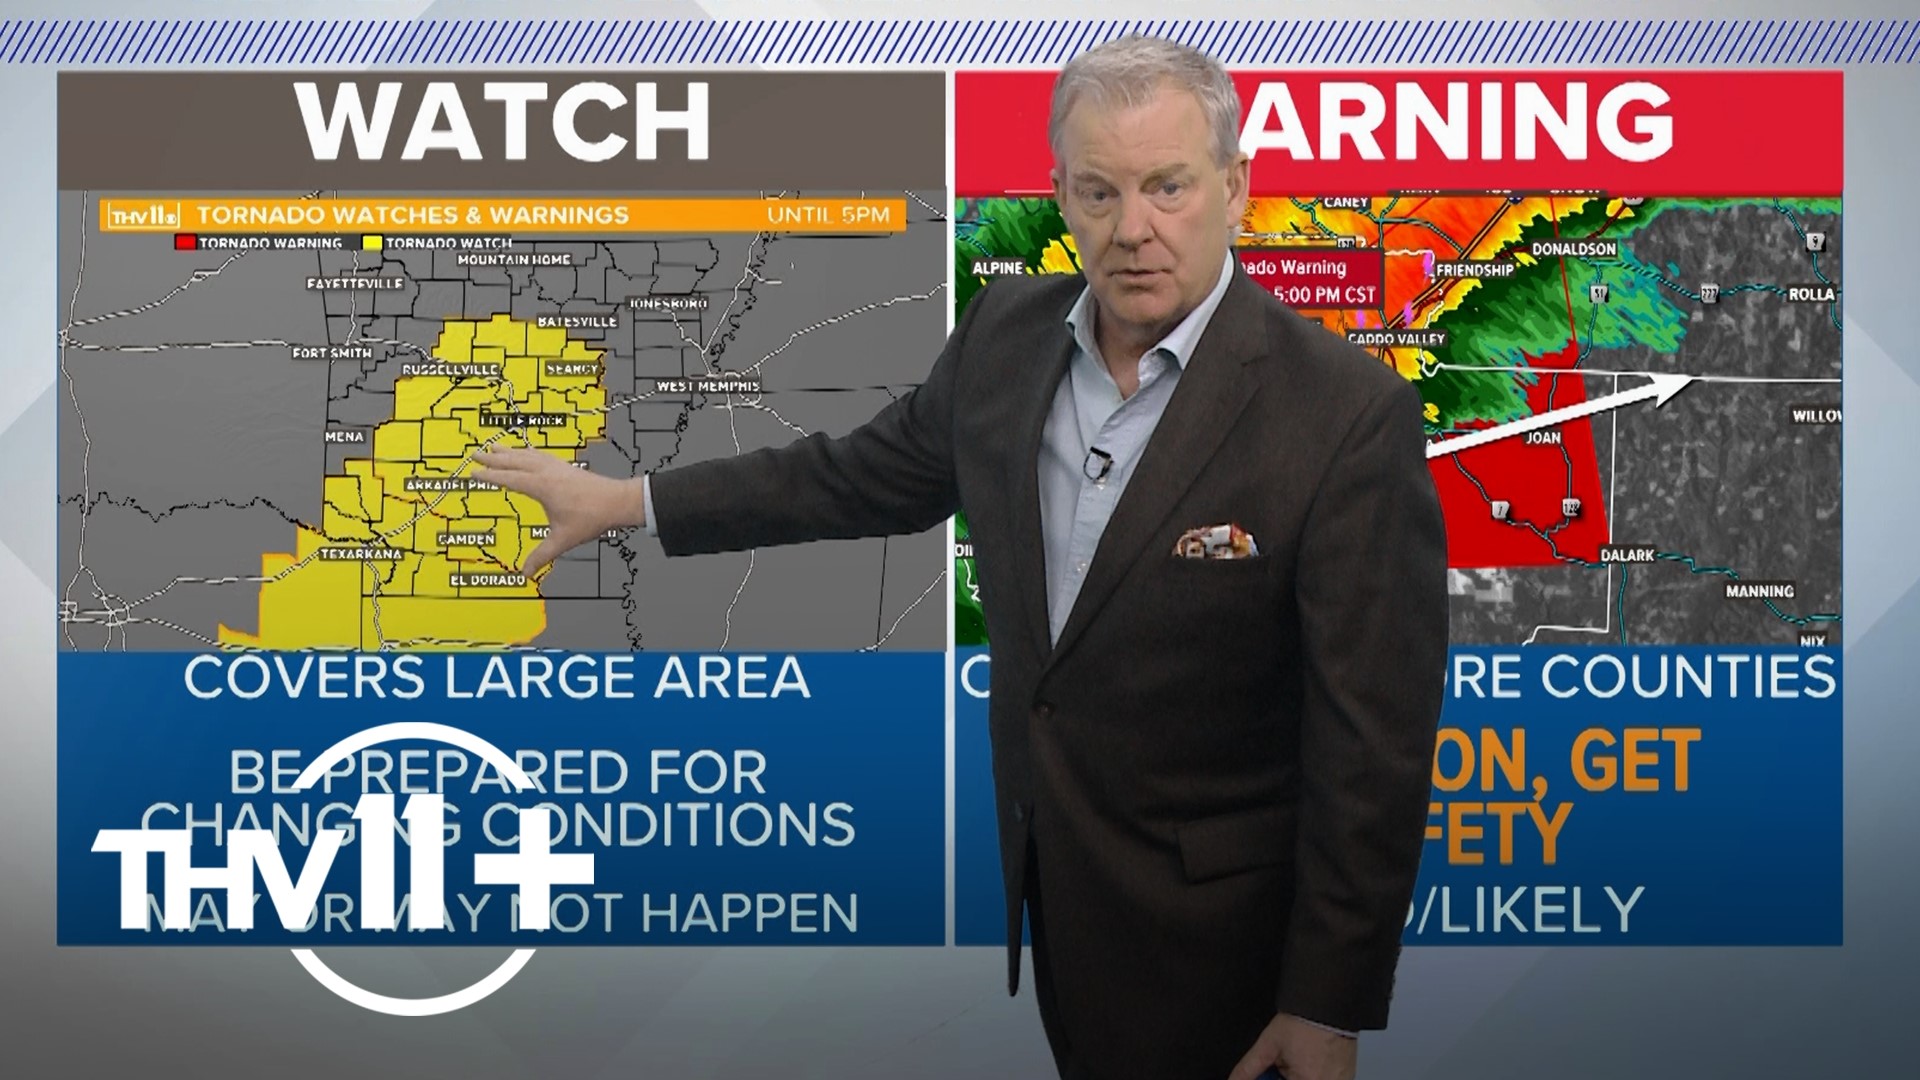 Severe weather season usually leads to a lot of "watch" and "warning" alerts on your phone. We break down what they may and what you need to do.